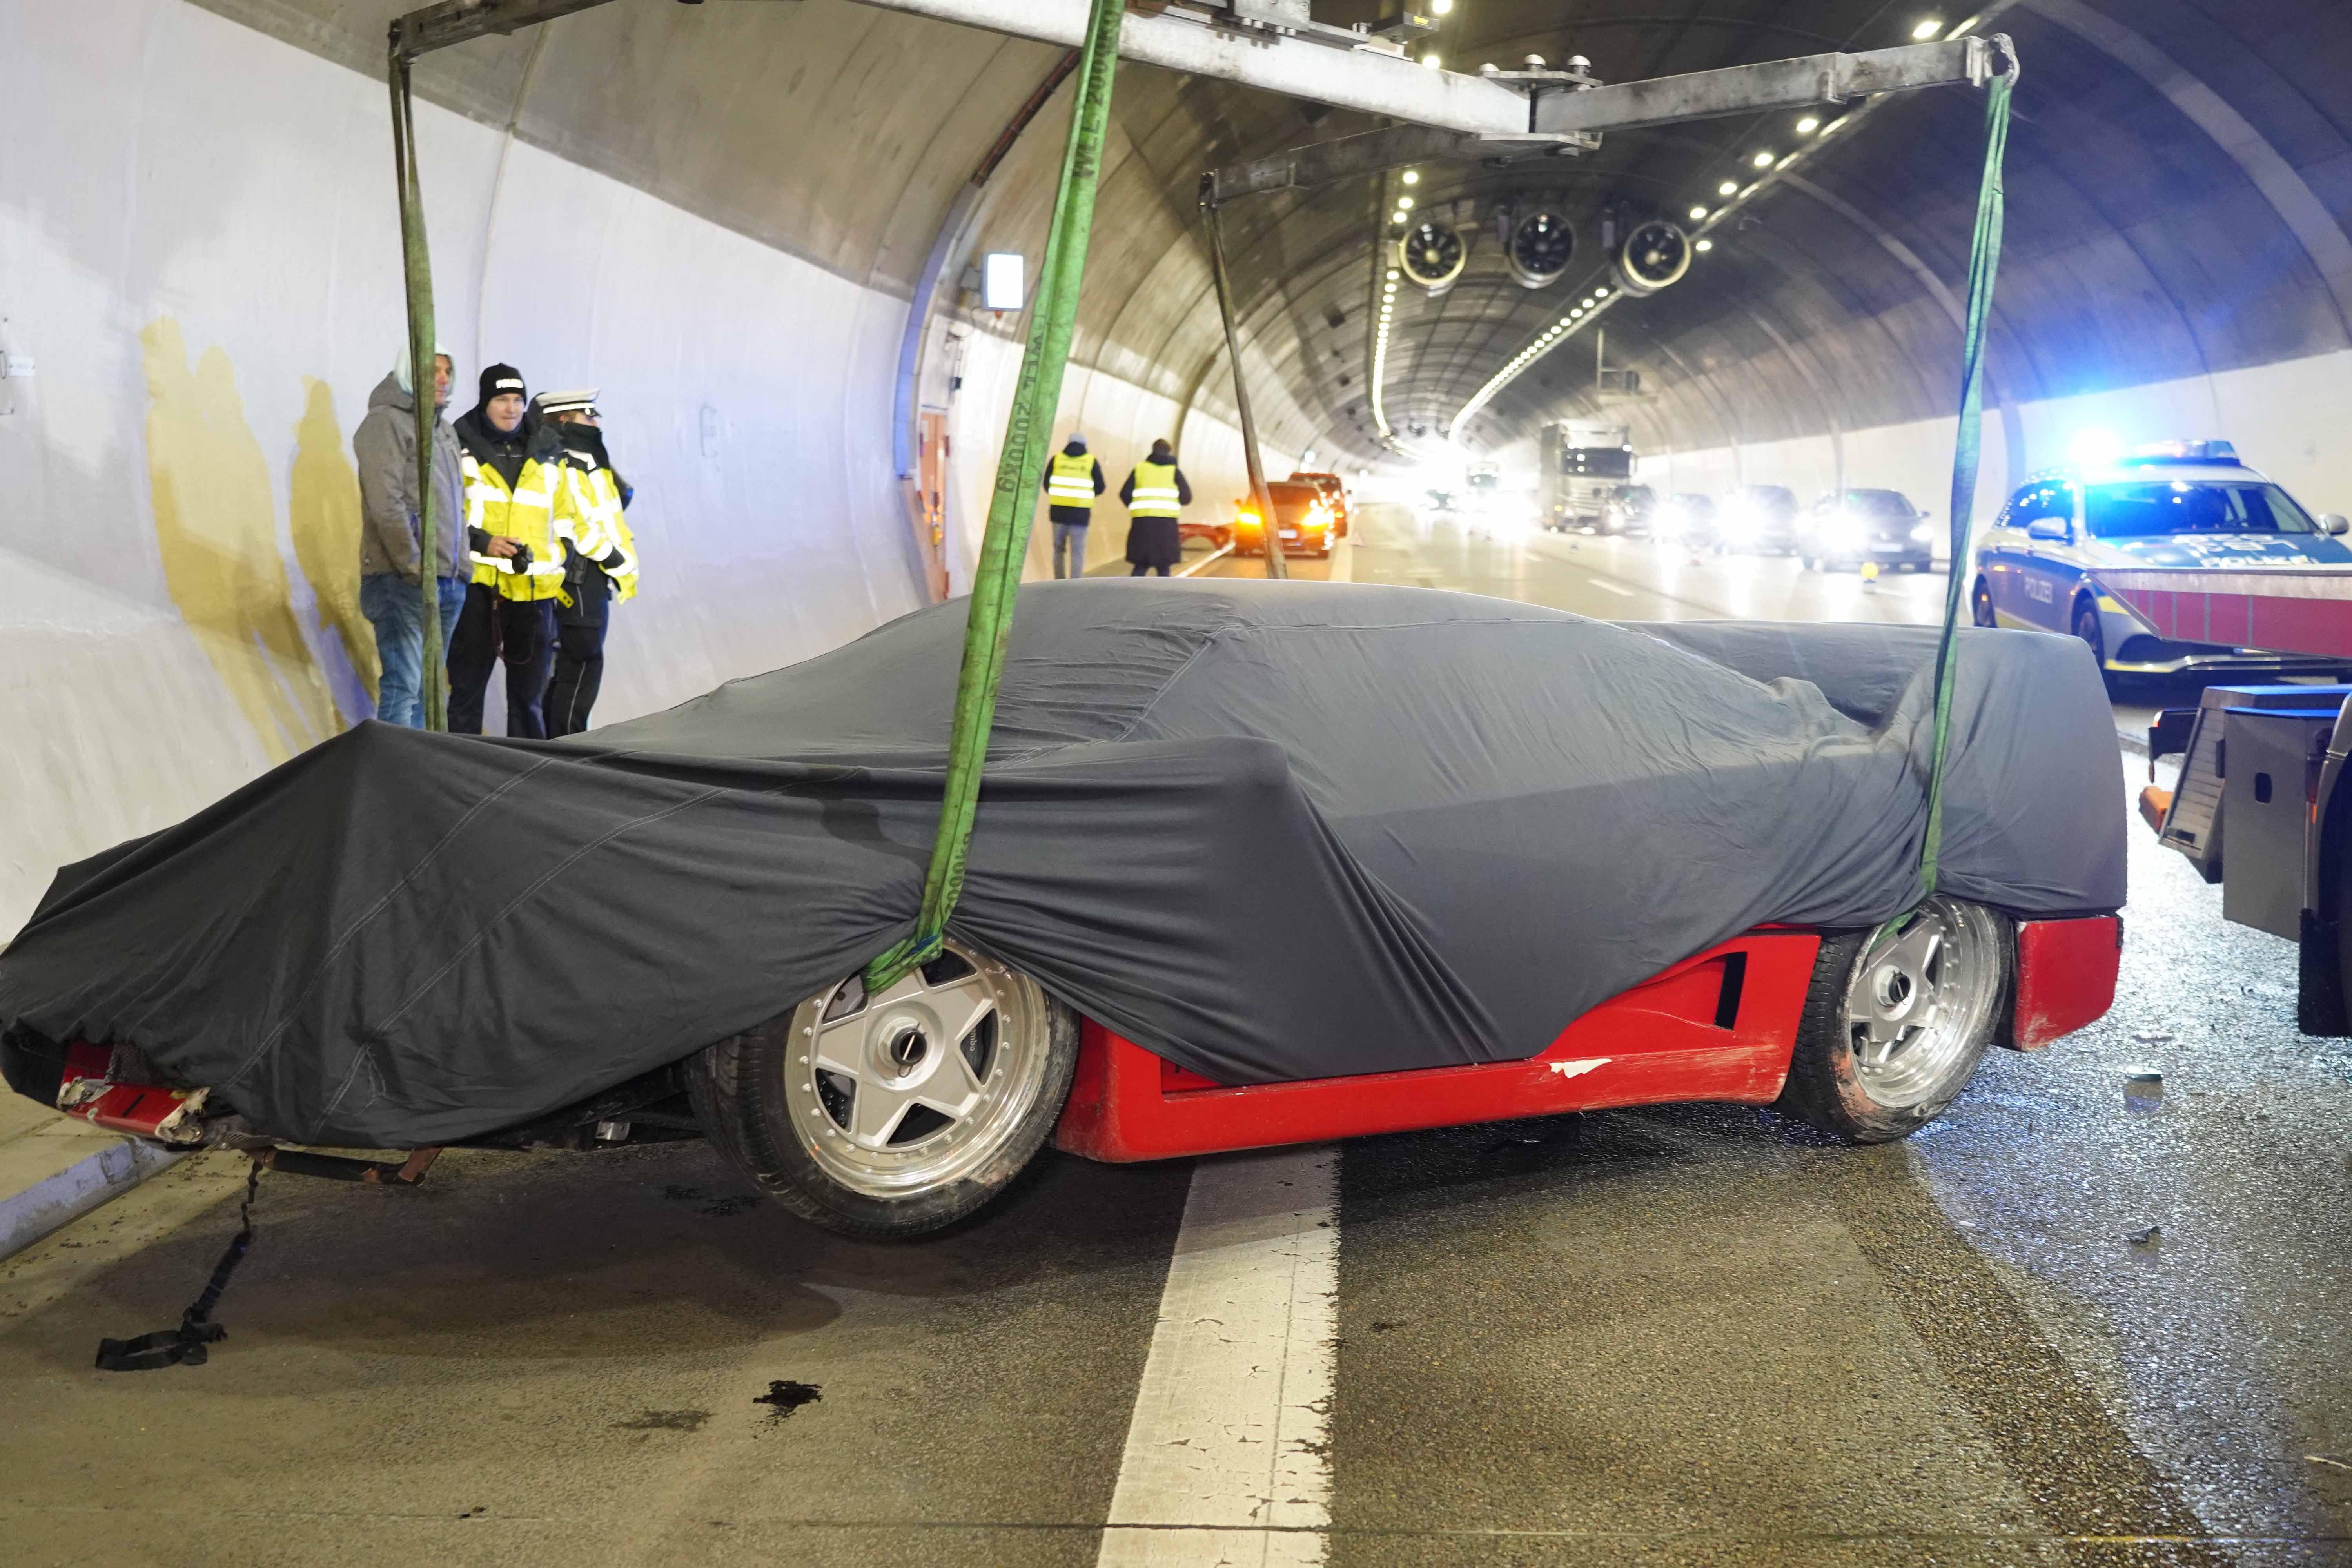 A £2.6 million Ferrari F40 was crashed into a tunnel in Stuttgart, Germany